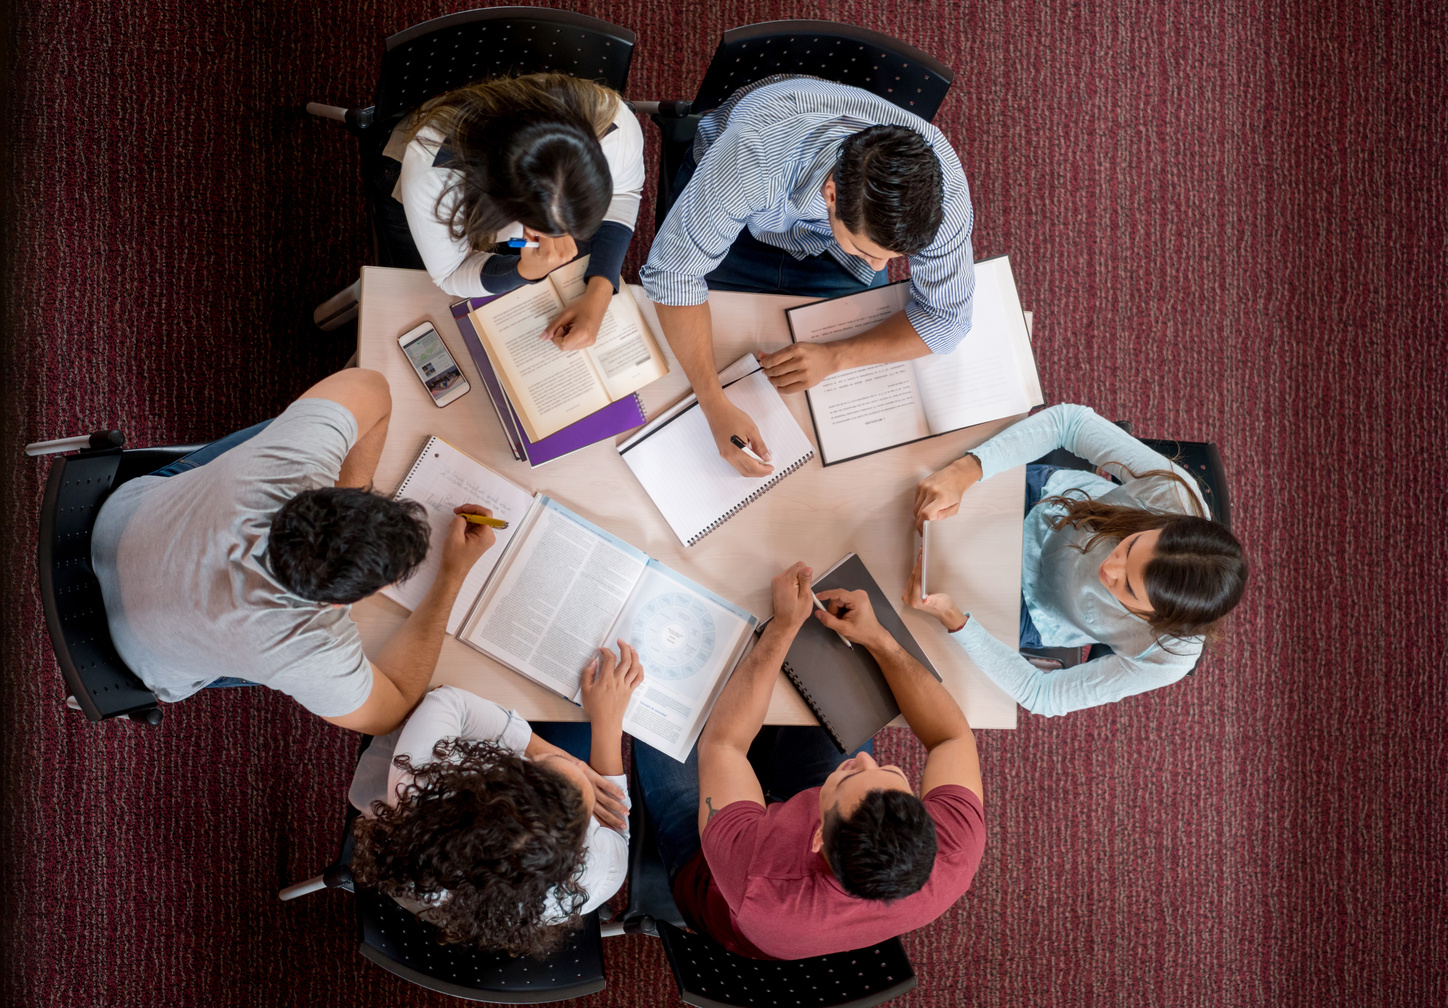 Group of college students studying together in a roundtable